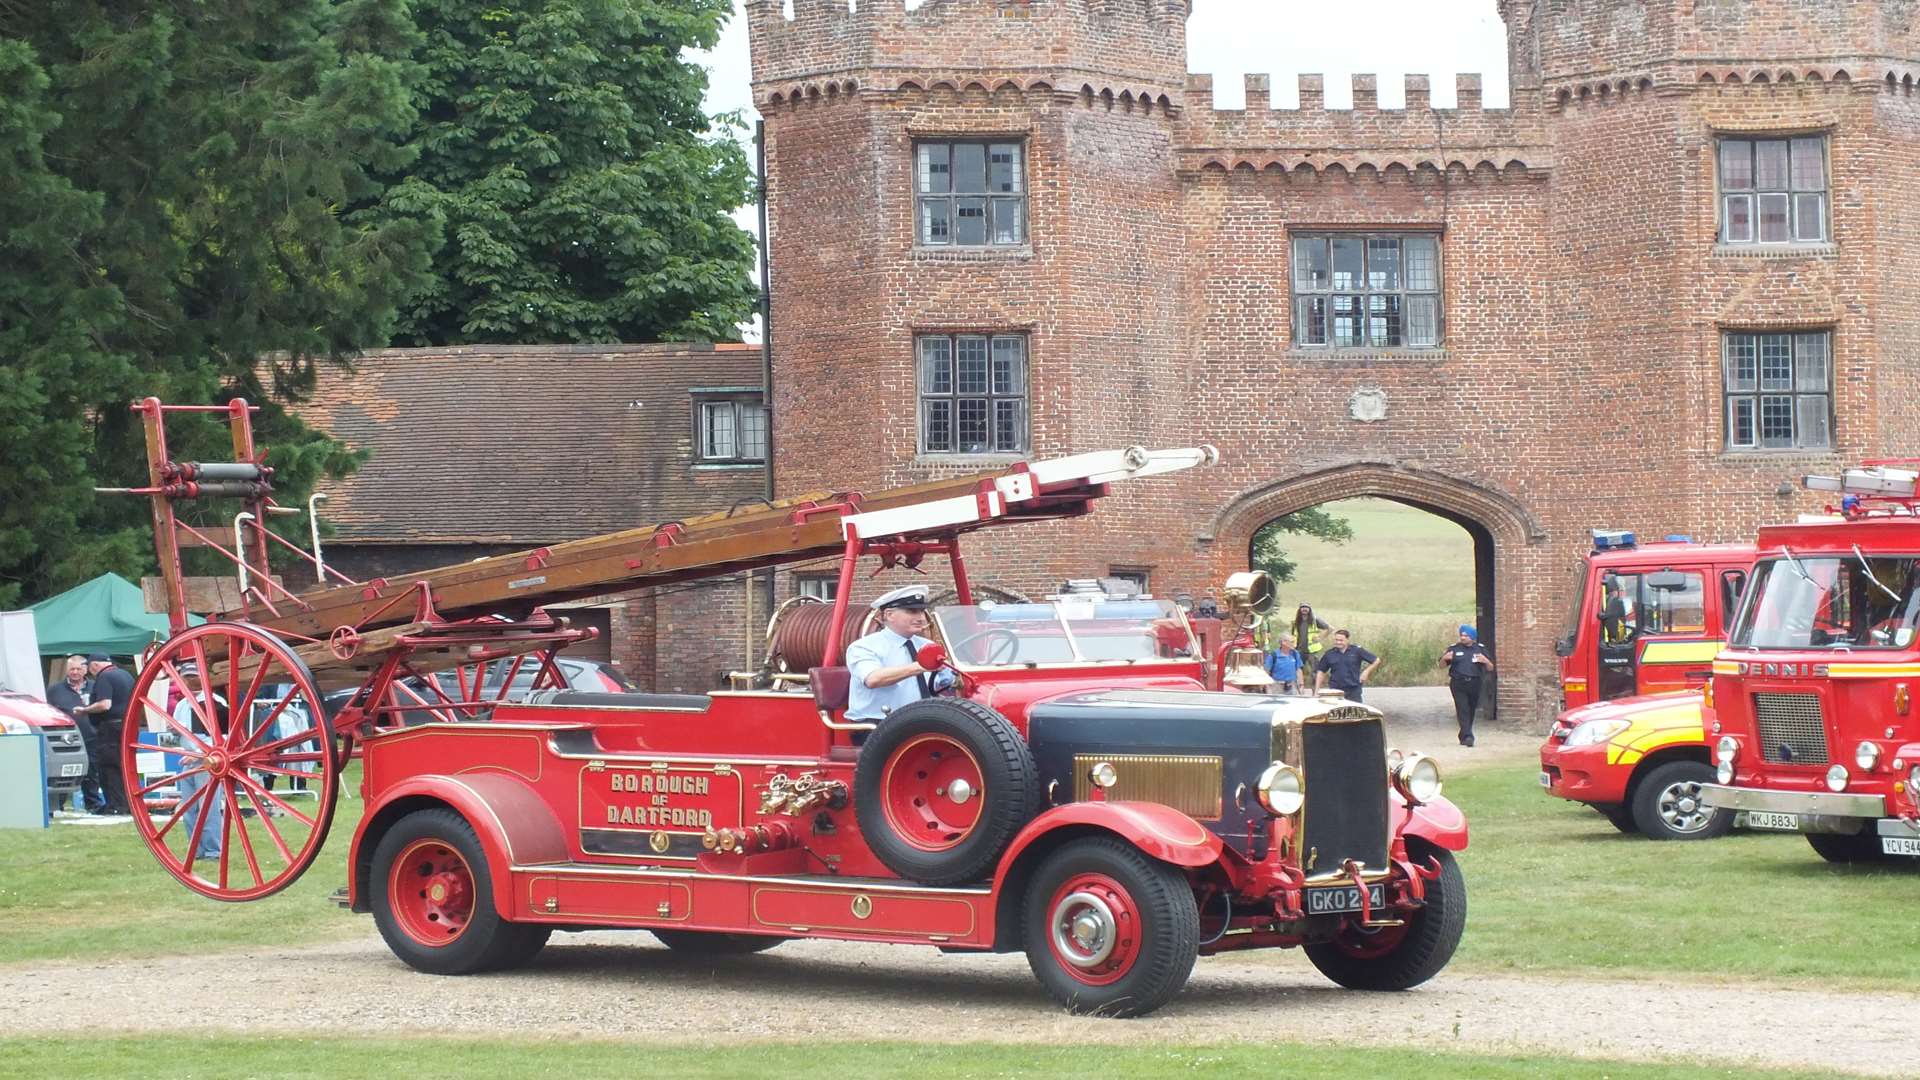 The fire engine rally is at Lullingstone Castle, near Eynsford, this weekend